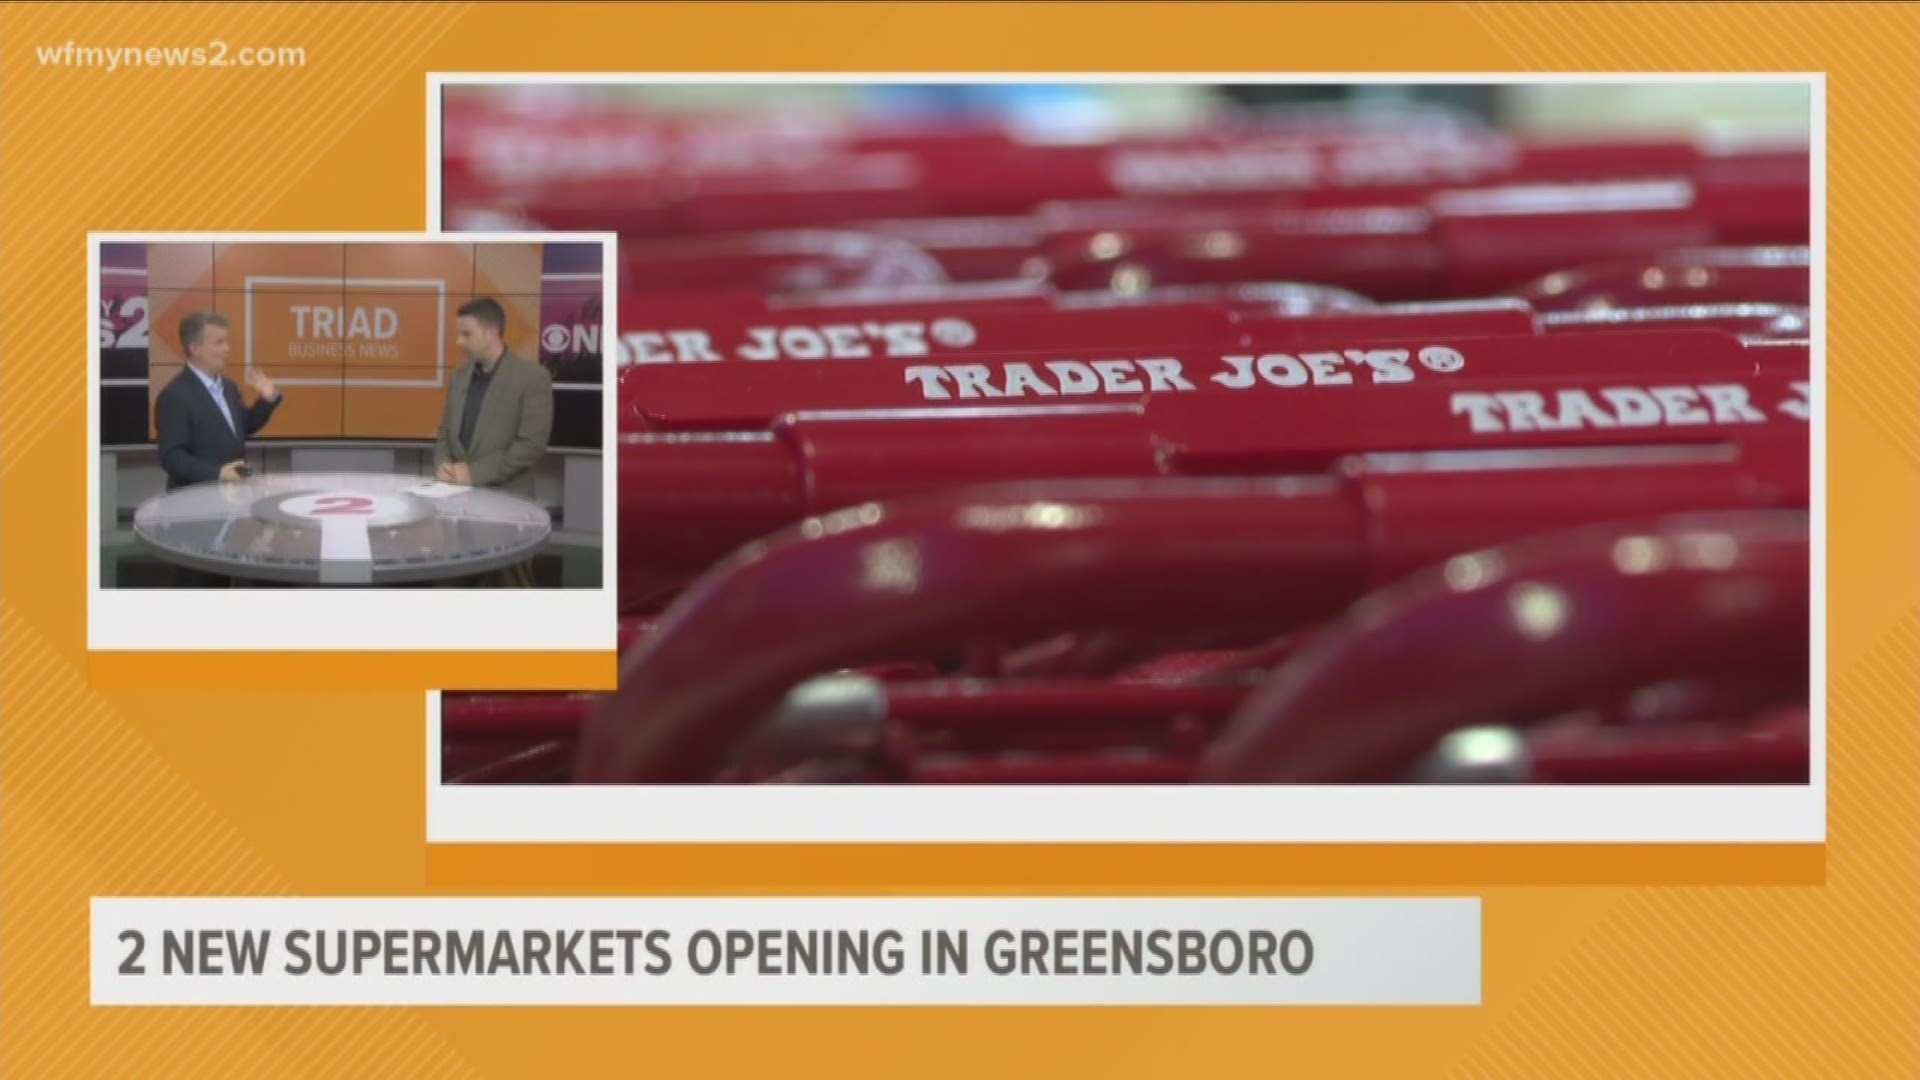 The Triad Business Journal talks about how thriving furniture sales could mean more jobs soon and the new grocery store options for Greensboro shoppers.